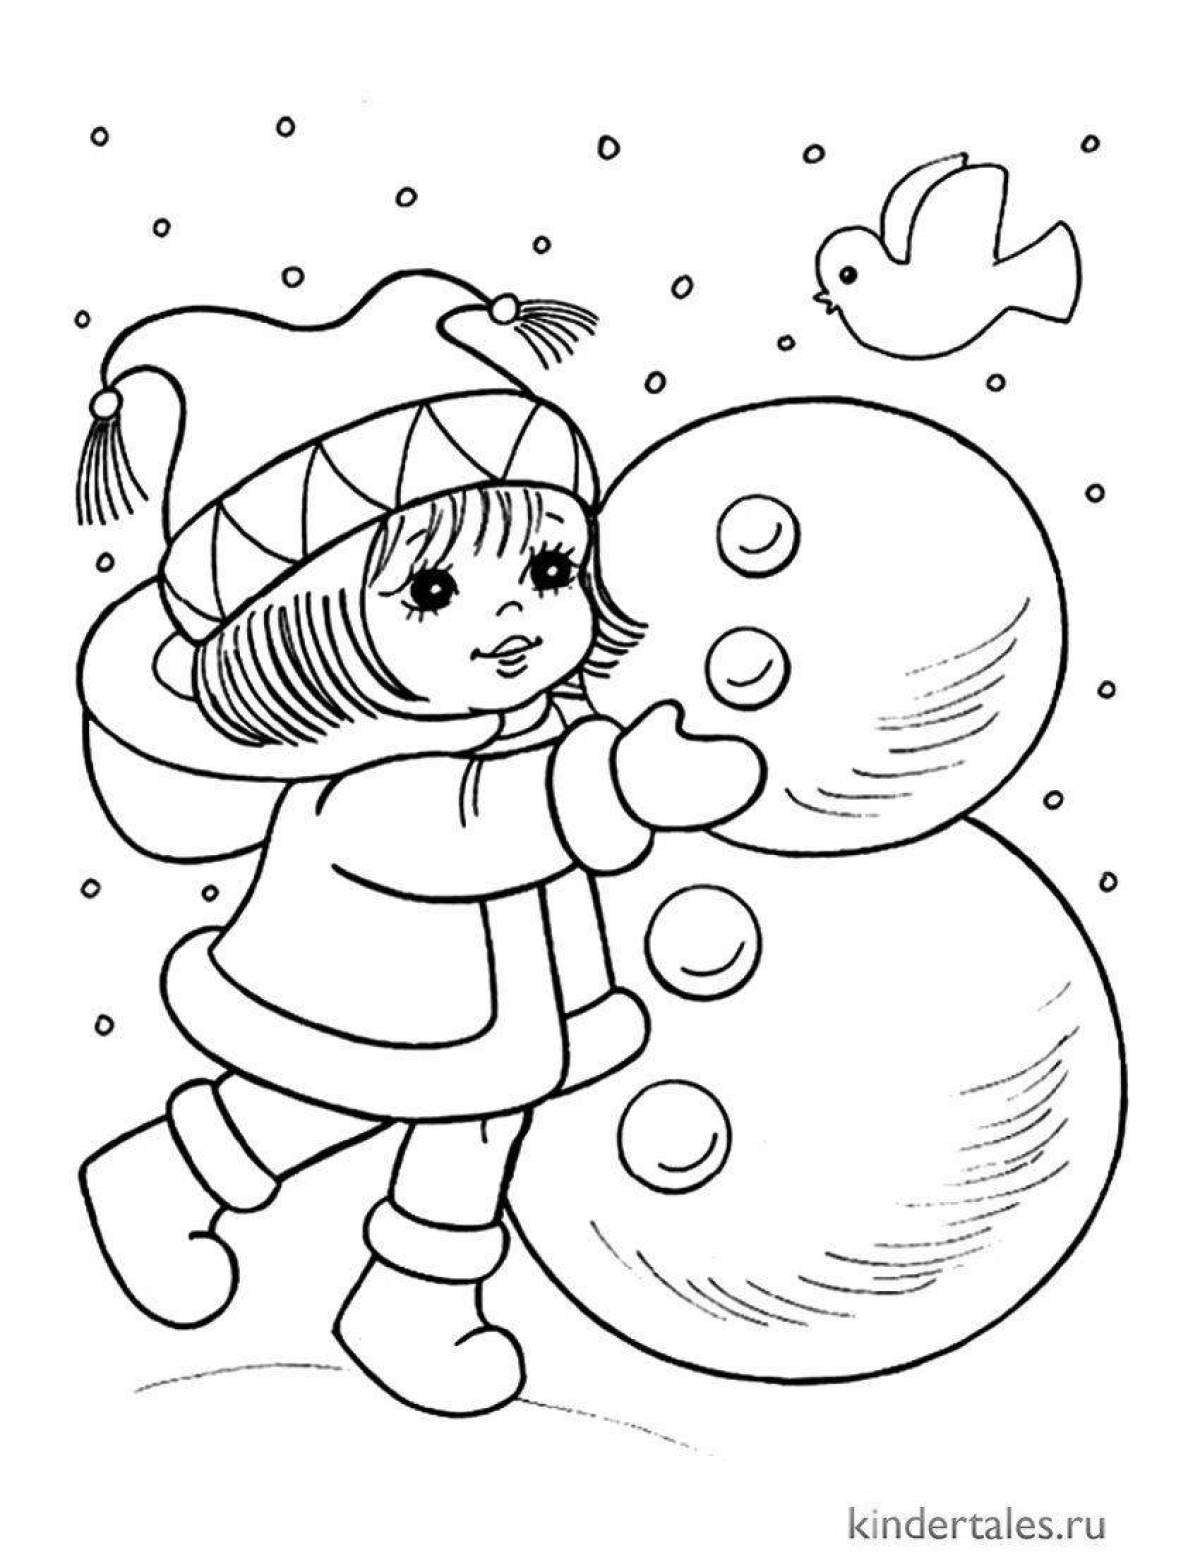 Coloring page bright snowman girl